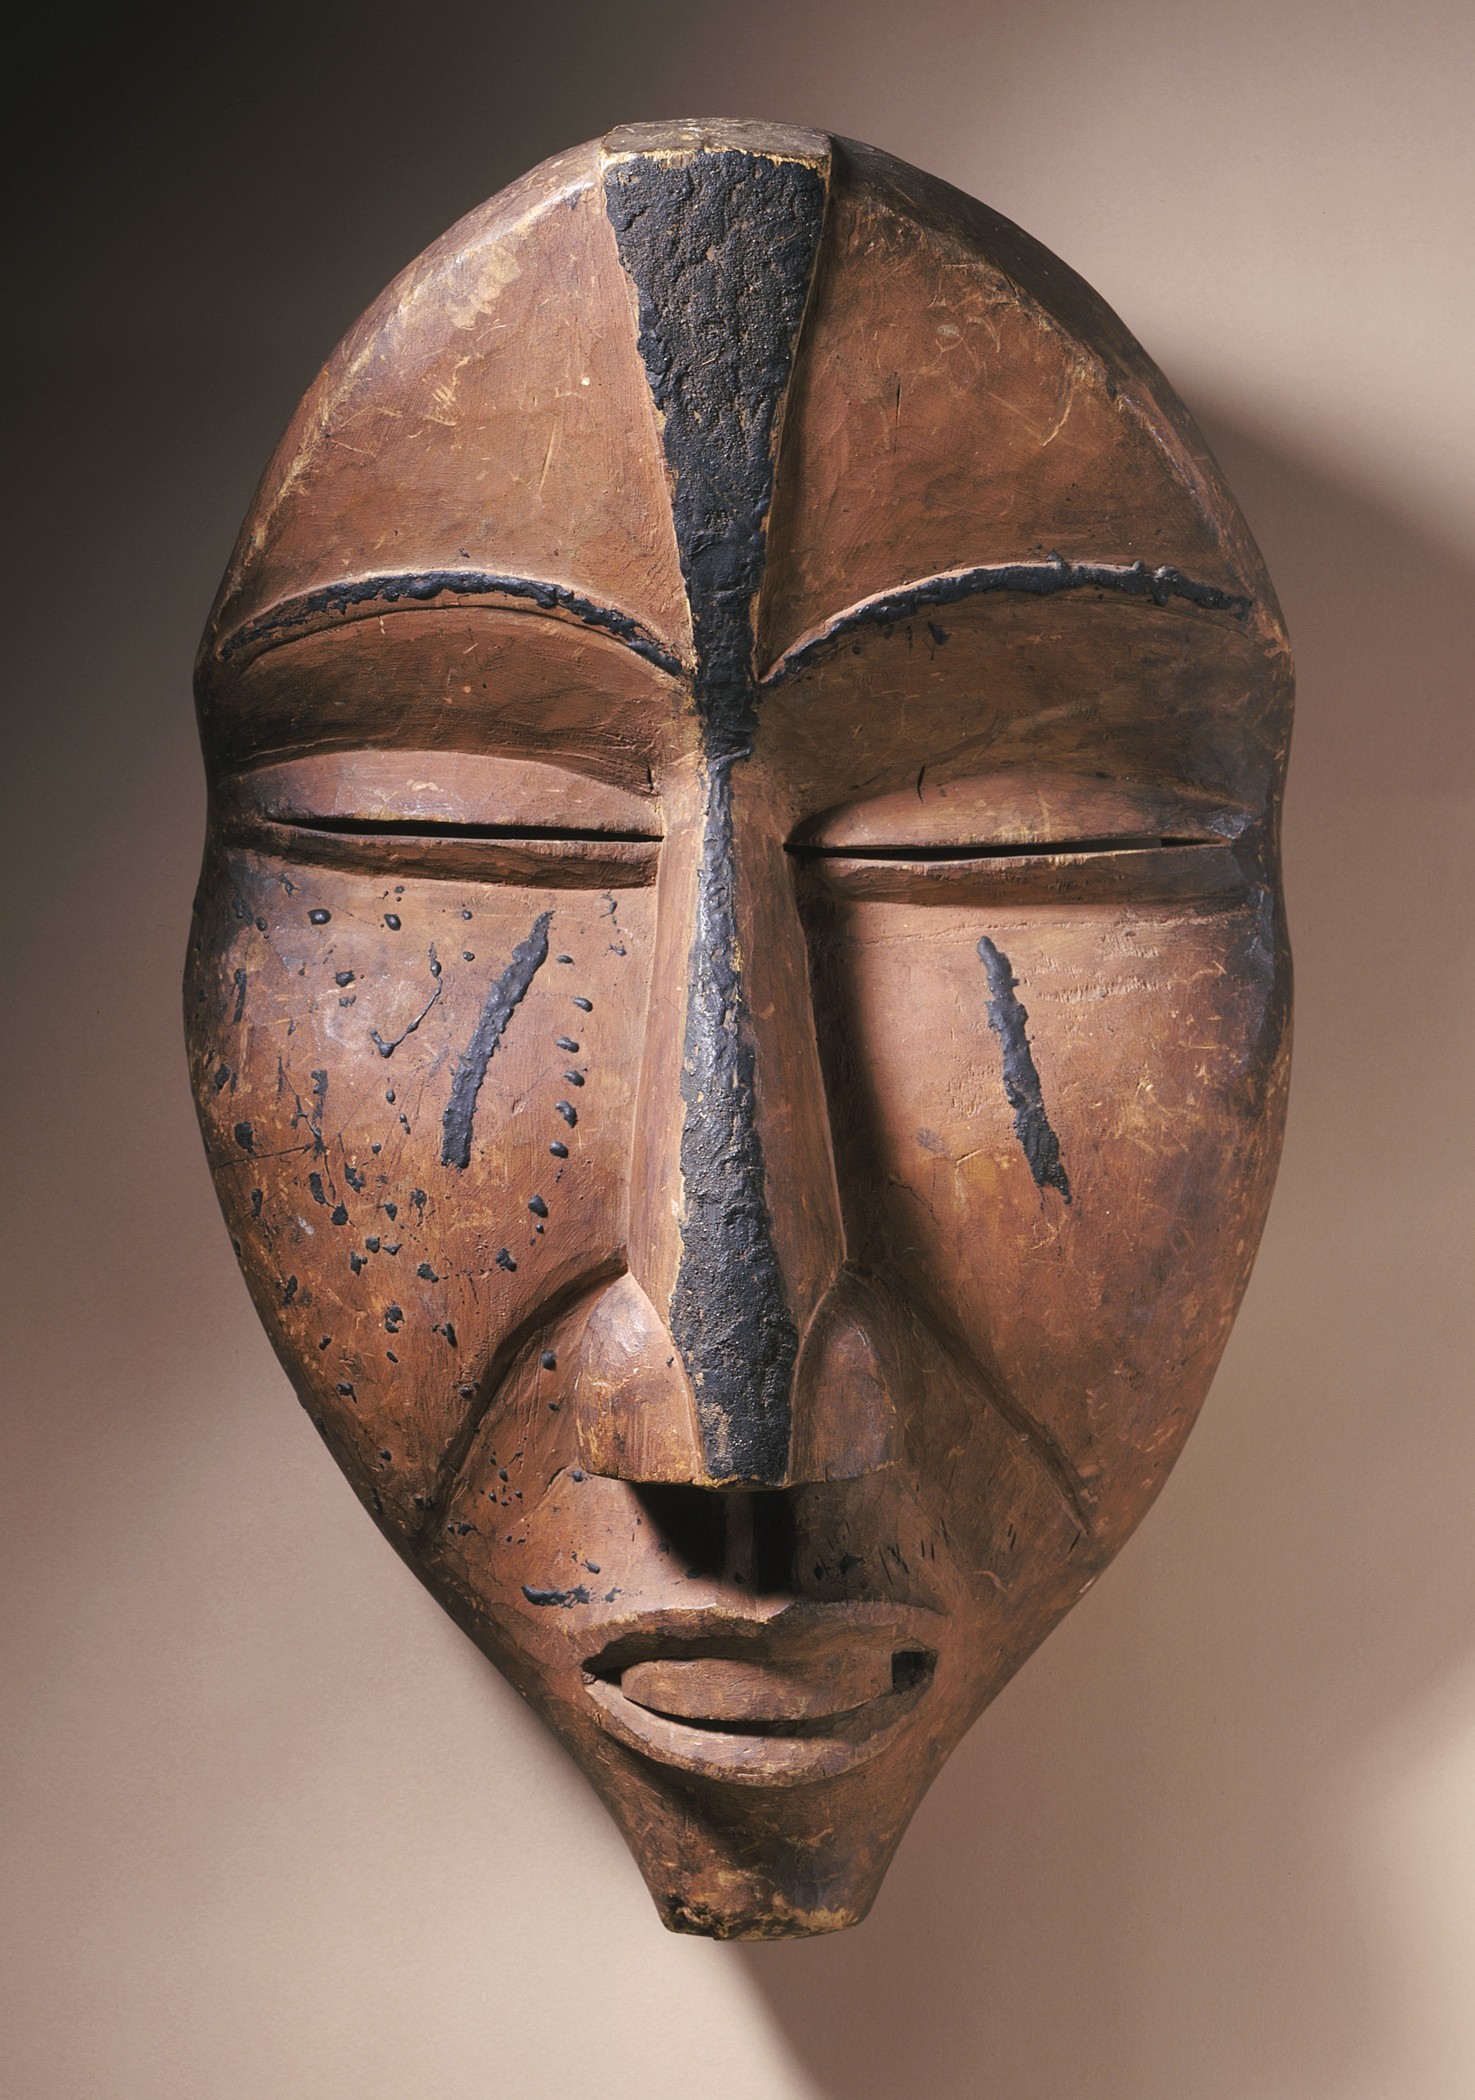 Tradition as Innovation in African Art | LACMA